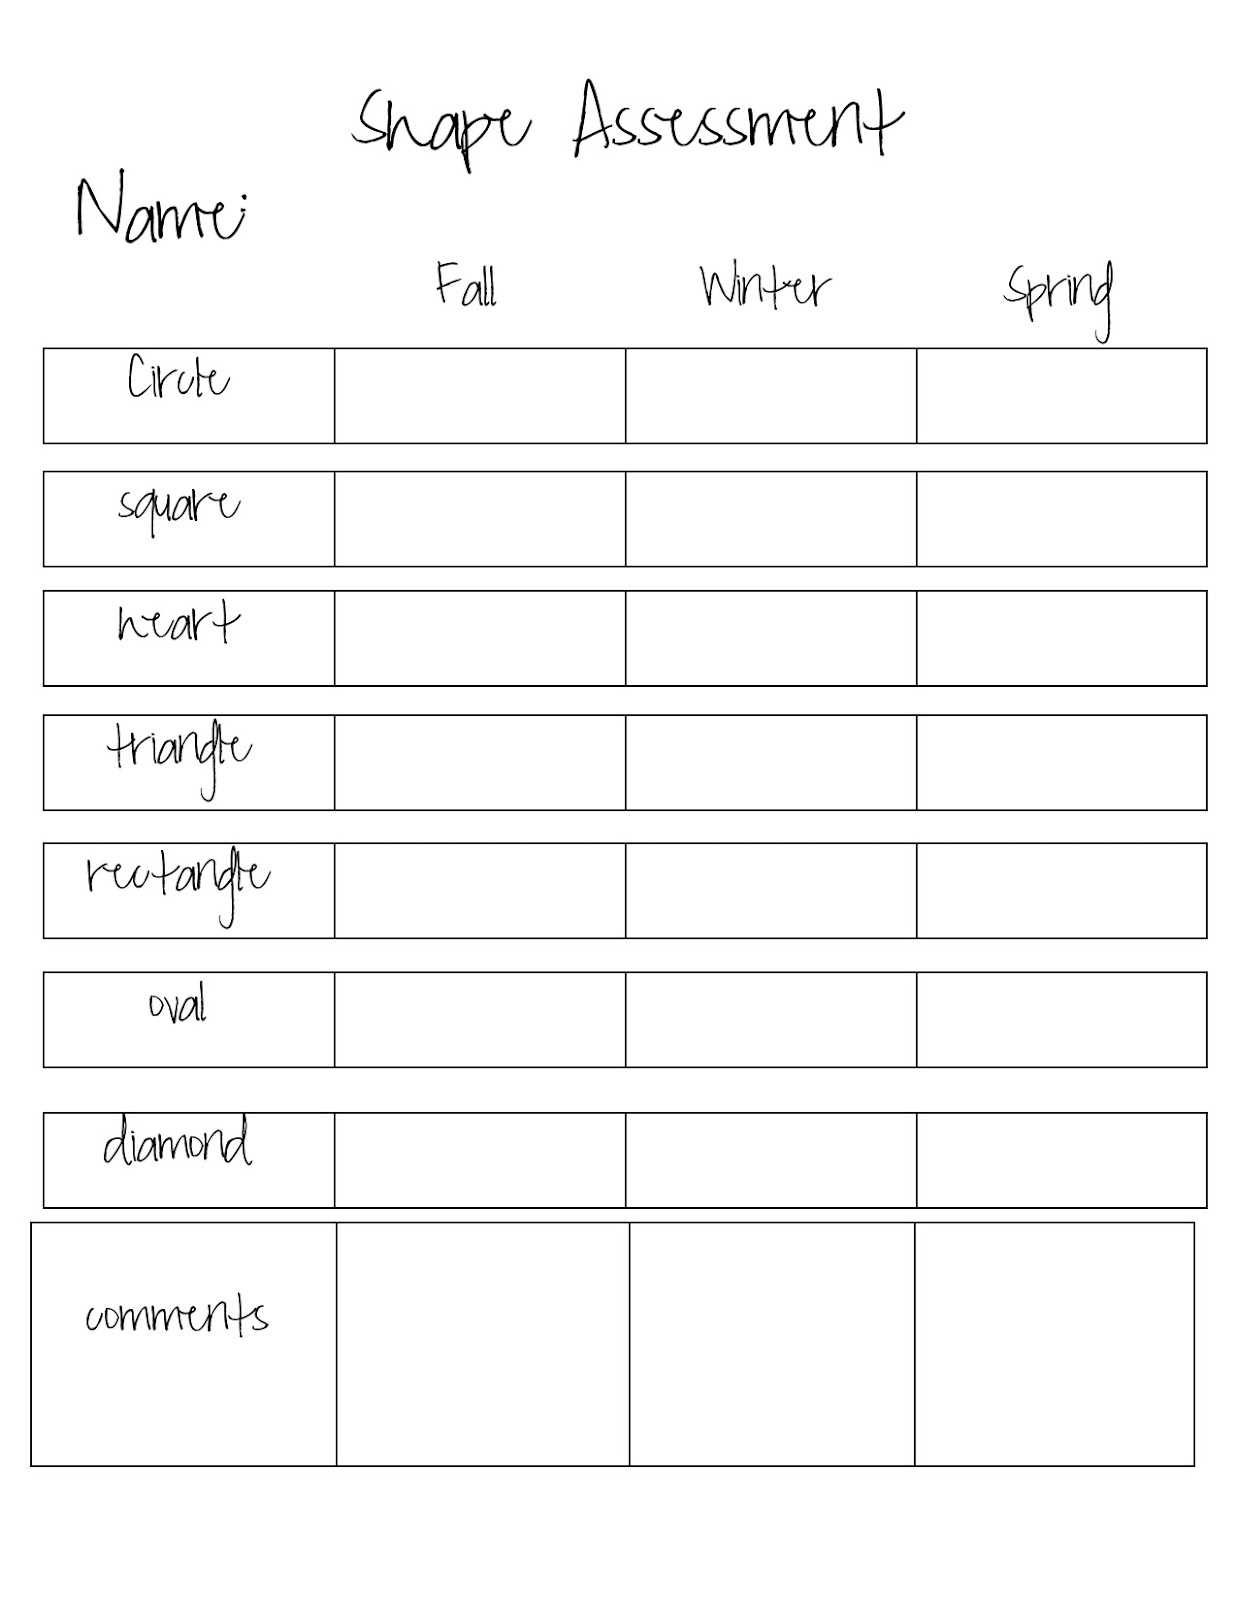 Shapes Worksheets for Preschool Along with Sweet Life Of Teaching sos sos Super organizing